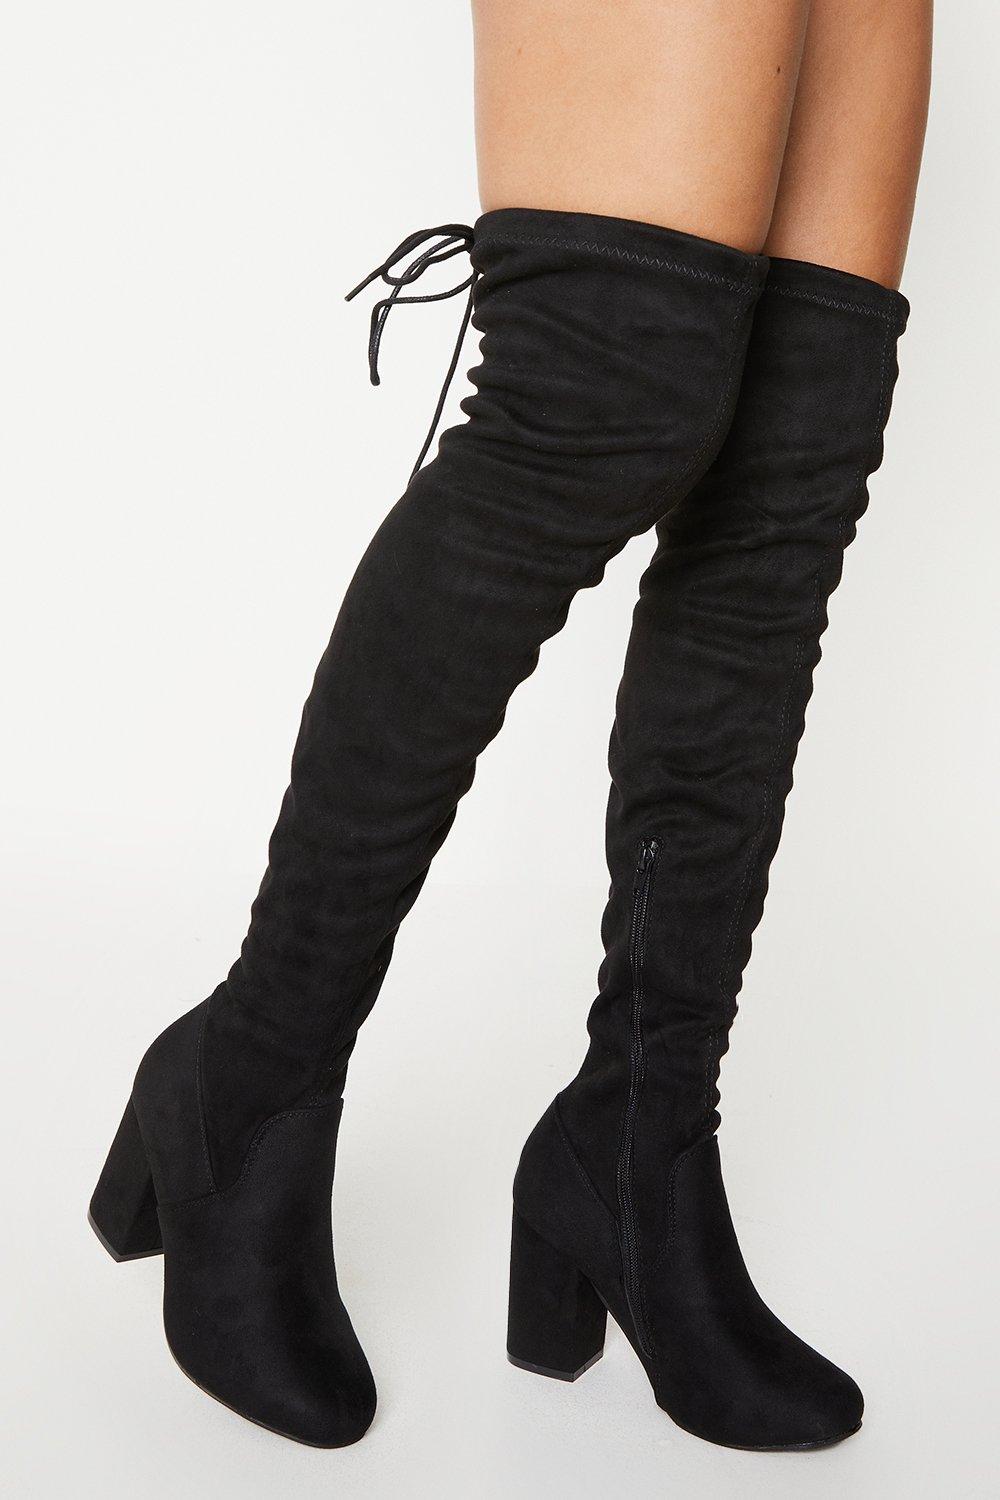 Women's Wide Fit Krissy Over The Knee Boots - natural black - 8